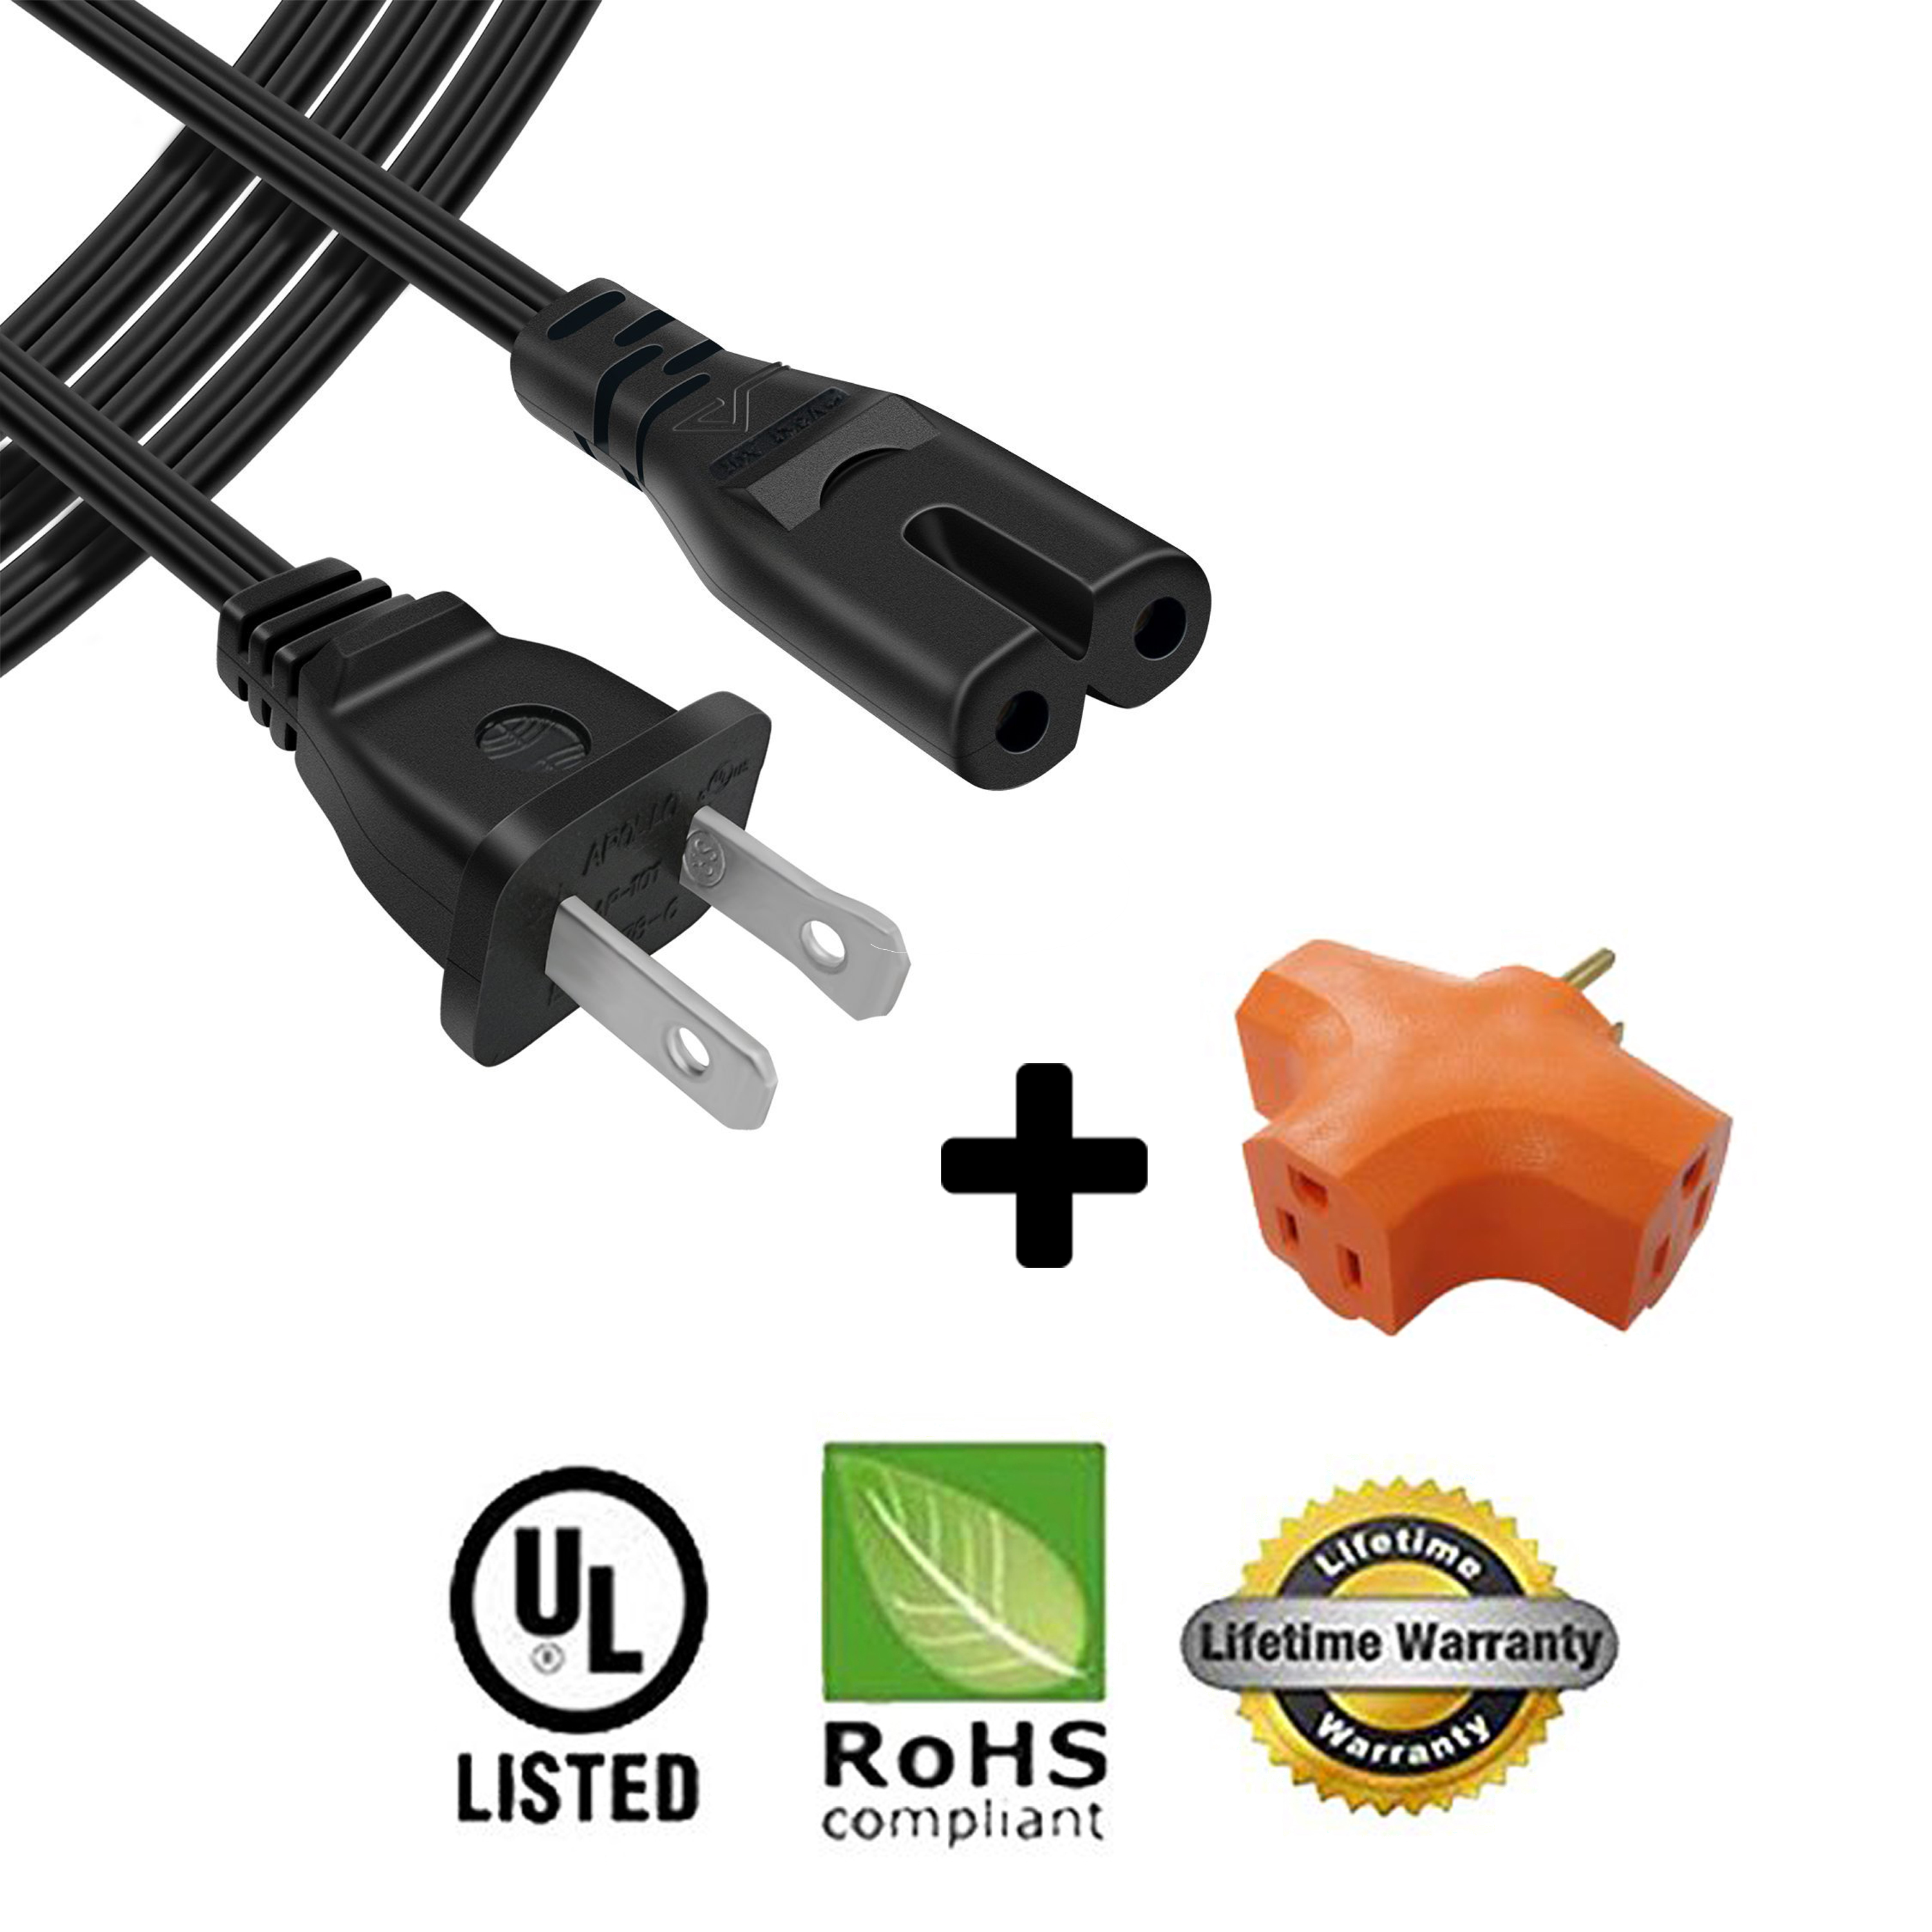 USB Data Cable Cord Lead for Peavey PV 6 USB 6 Channel Compact USB Mixer - 1ft - image 1 of 4